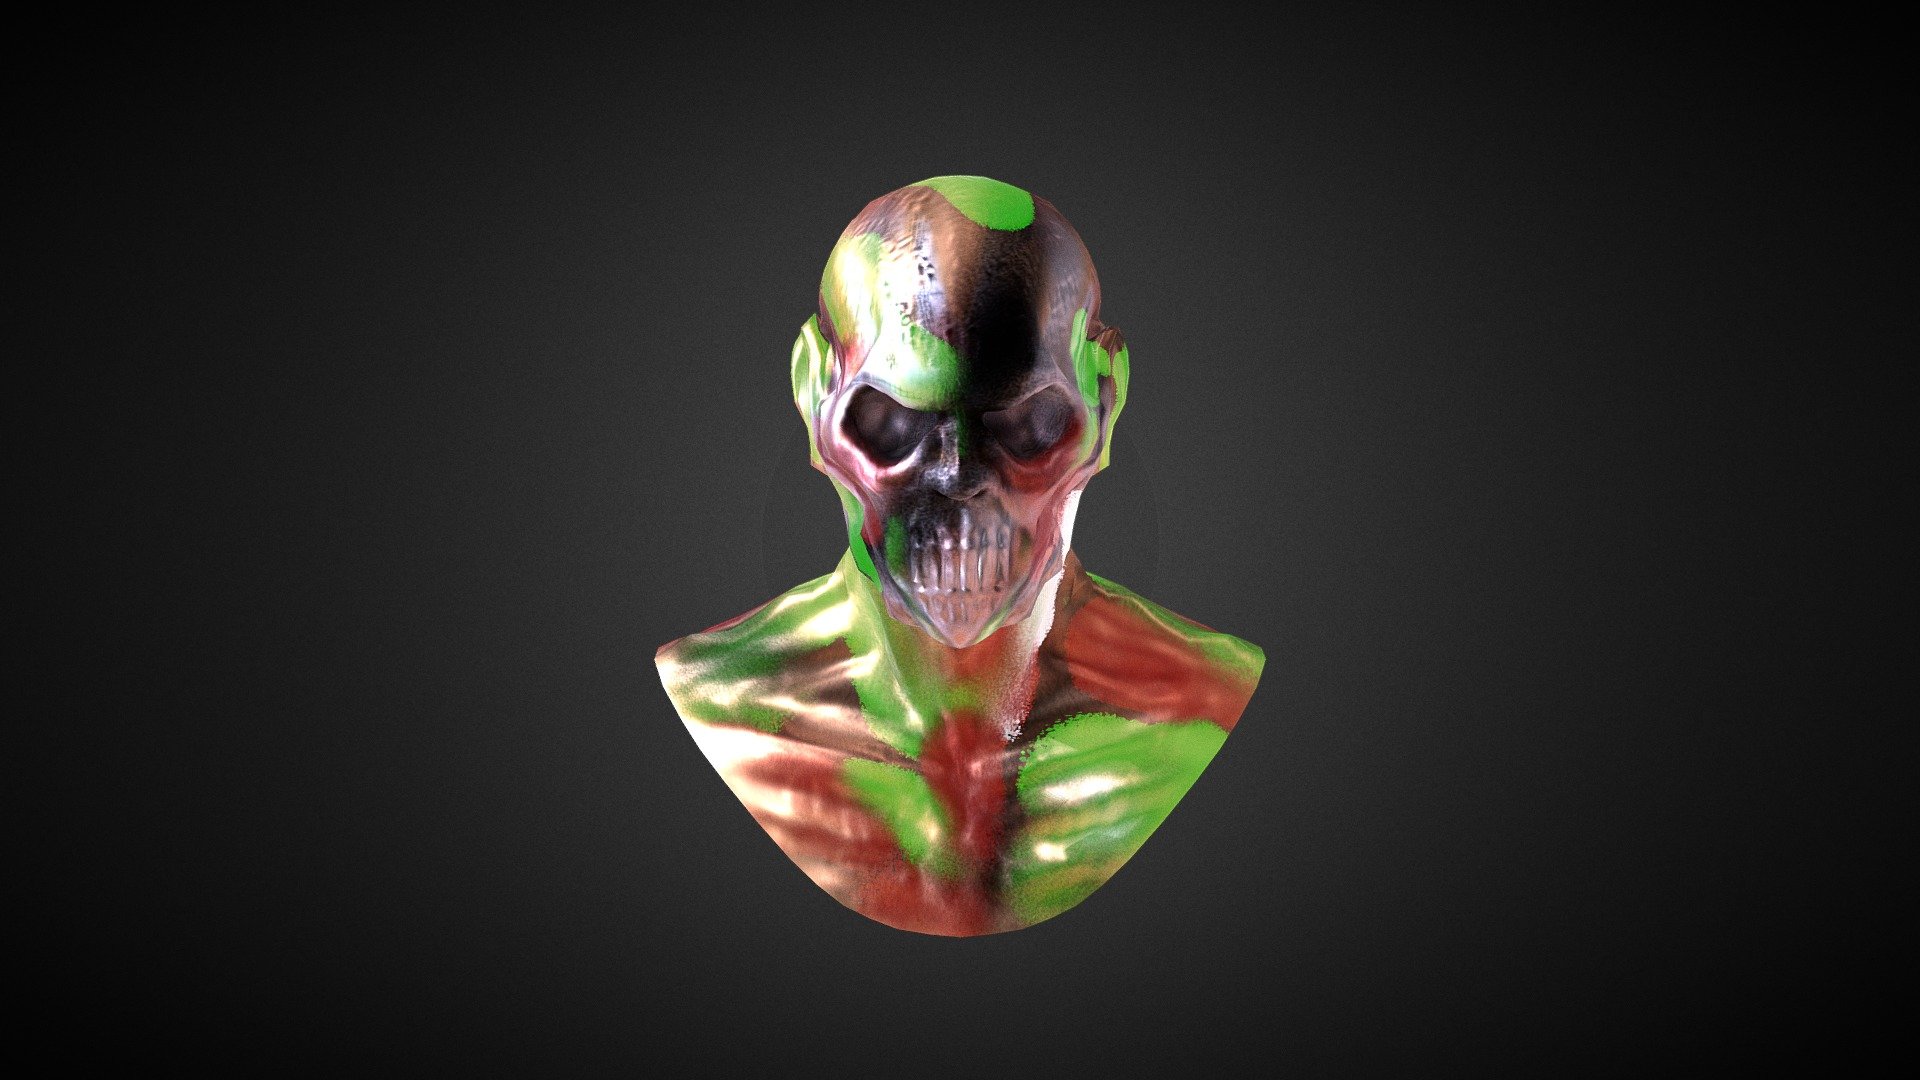 A war face painted radioactive skull and bleeding ghoul - Ghoul - Download Free 3D model by Franz Paredes (@Furantsu) 3d model